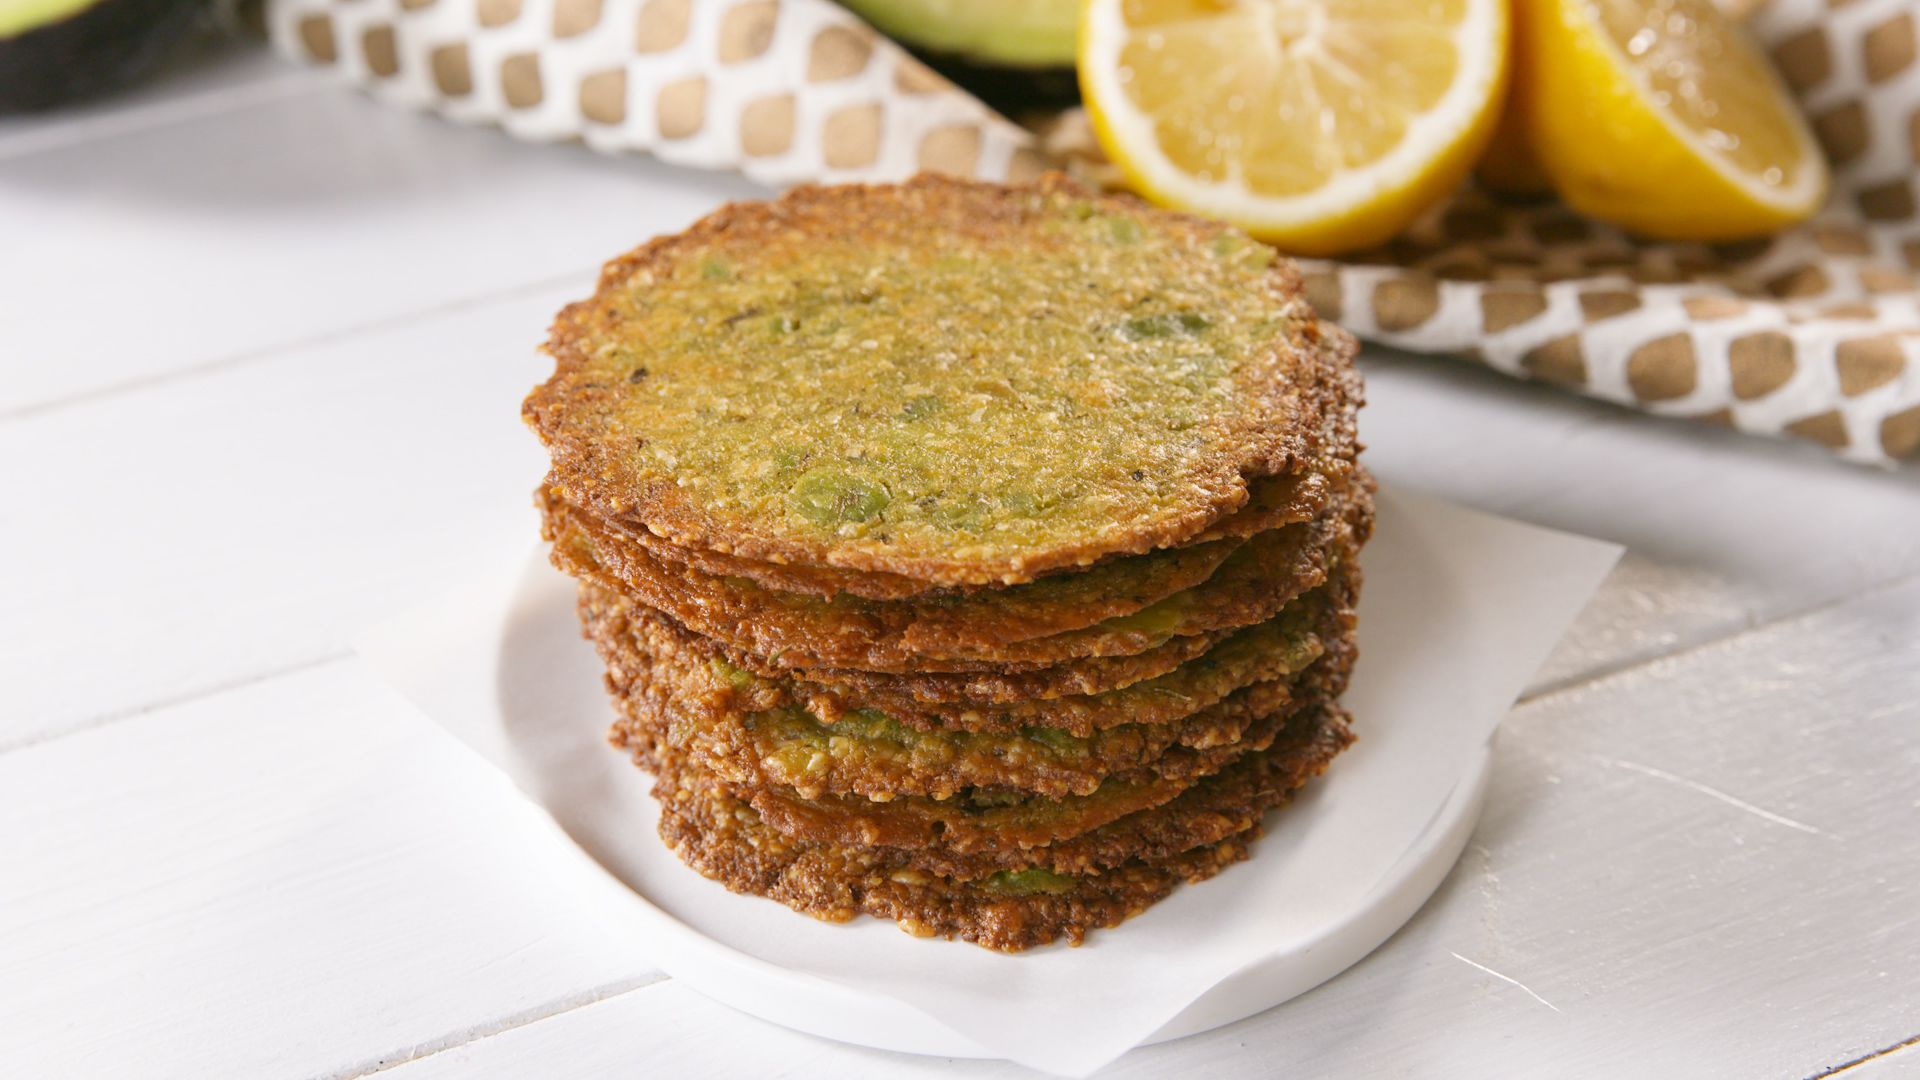 These avocado crisps (yes, really) are healthy, easy and seriously tasty